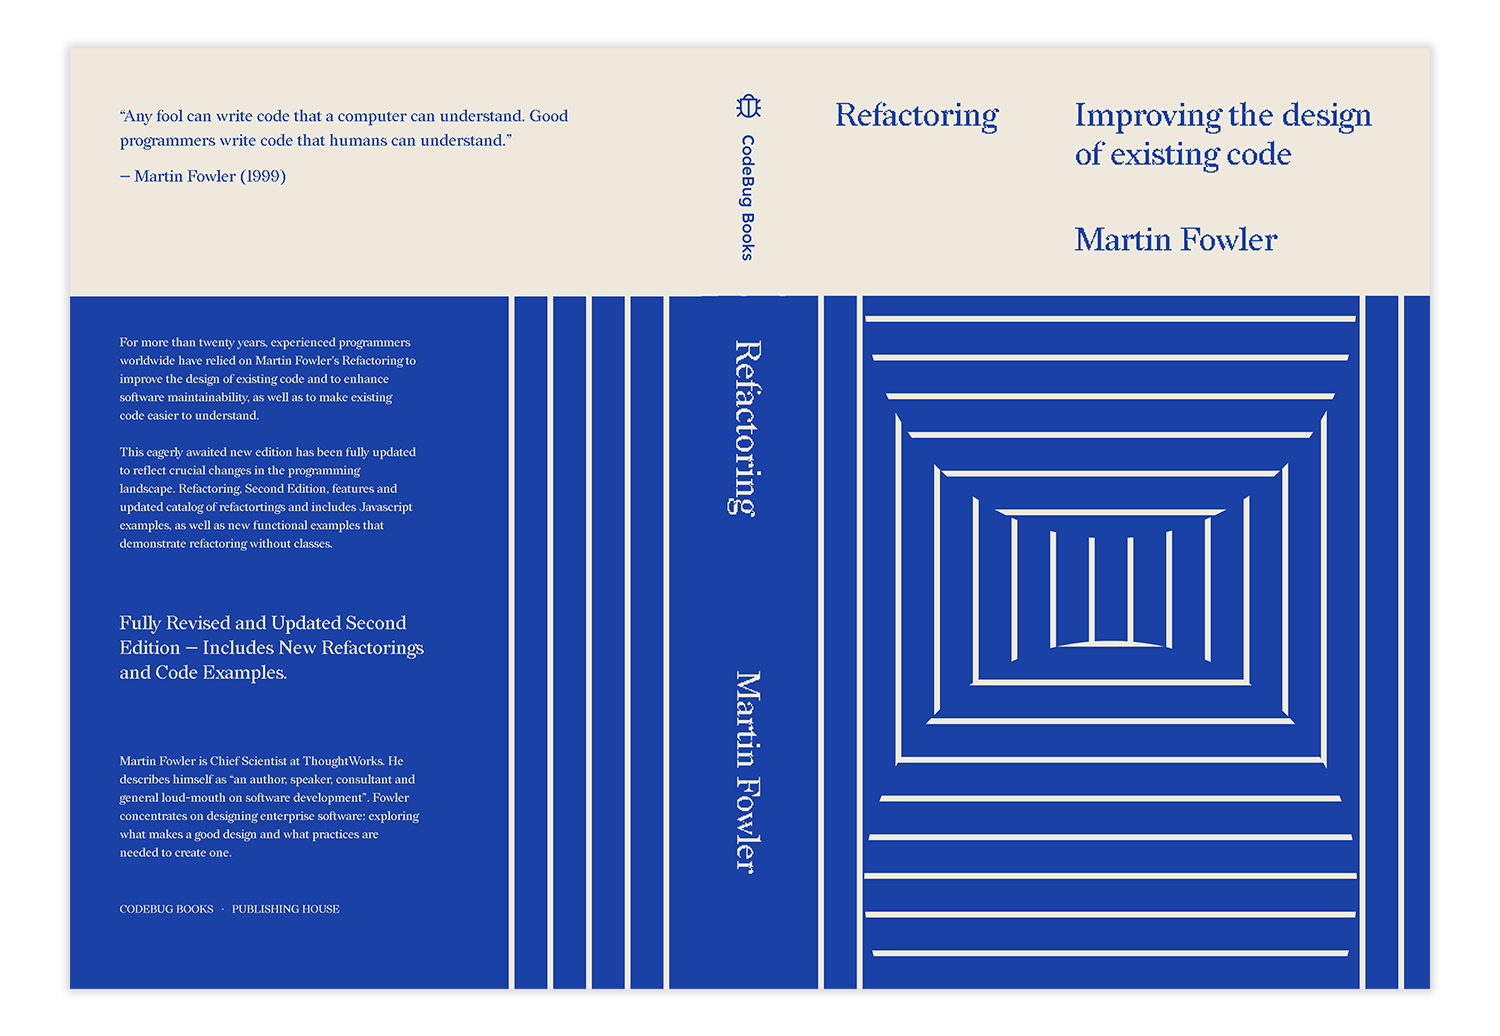 Cover design for "Refactoring". It is a vector design in electric blue and cream colors. It displays the front cover, spine, and back cover. On the front and back covers, there is a square and several circles formed by patterns of lines in different directions, creating an optical illusion.